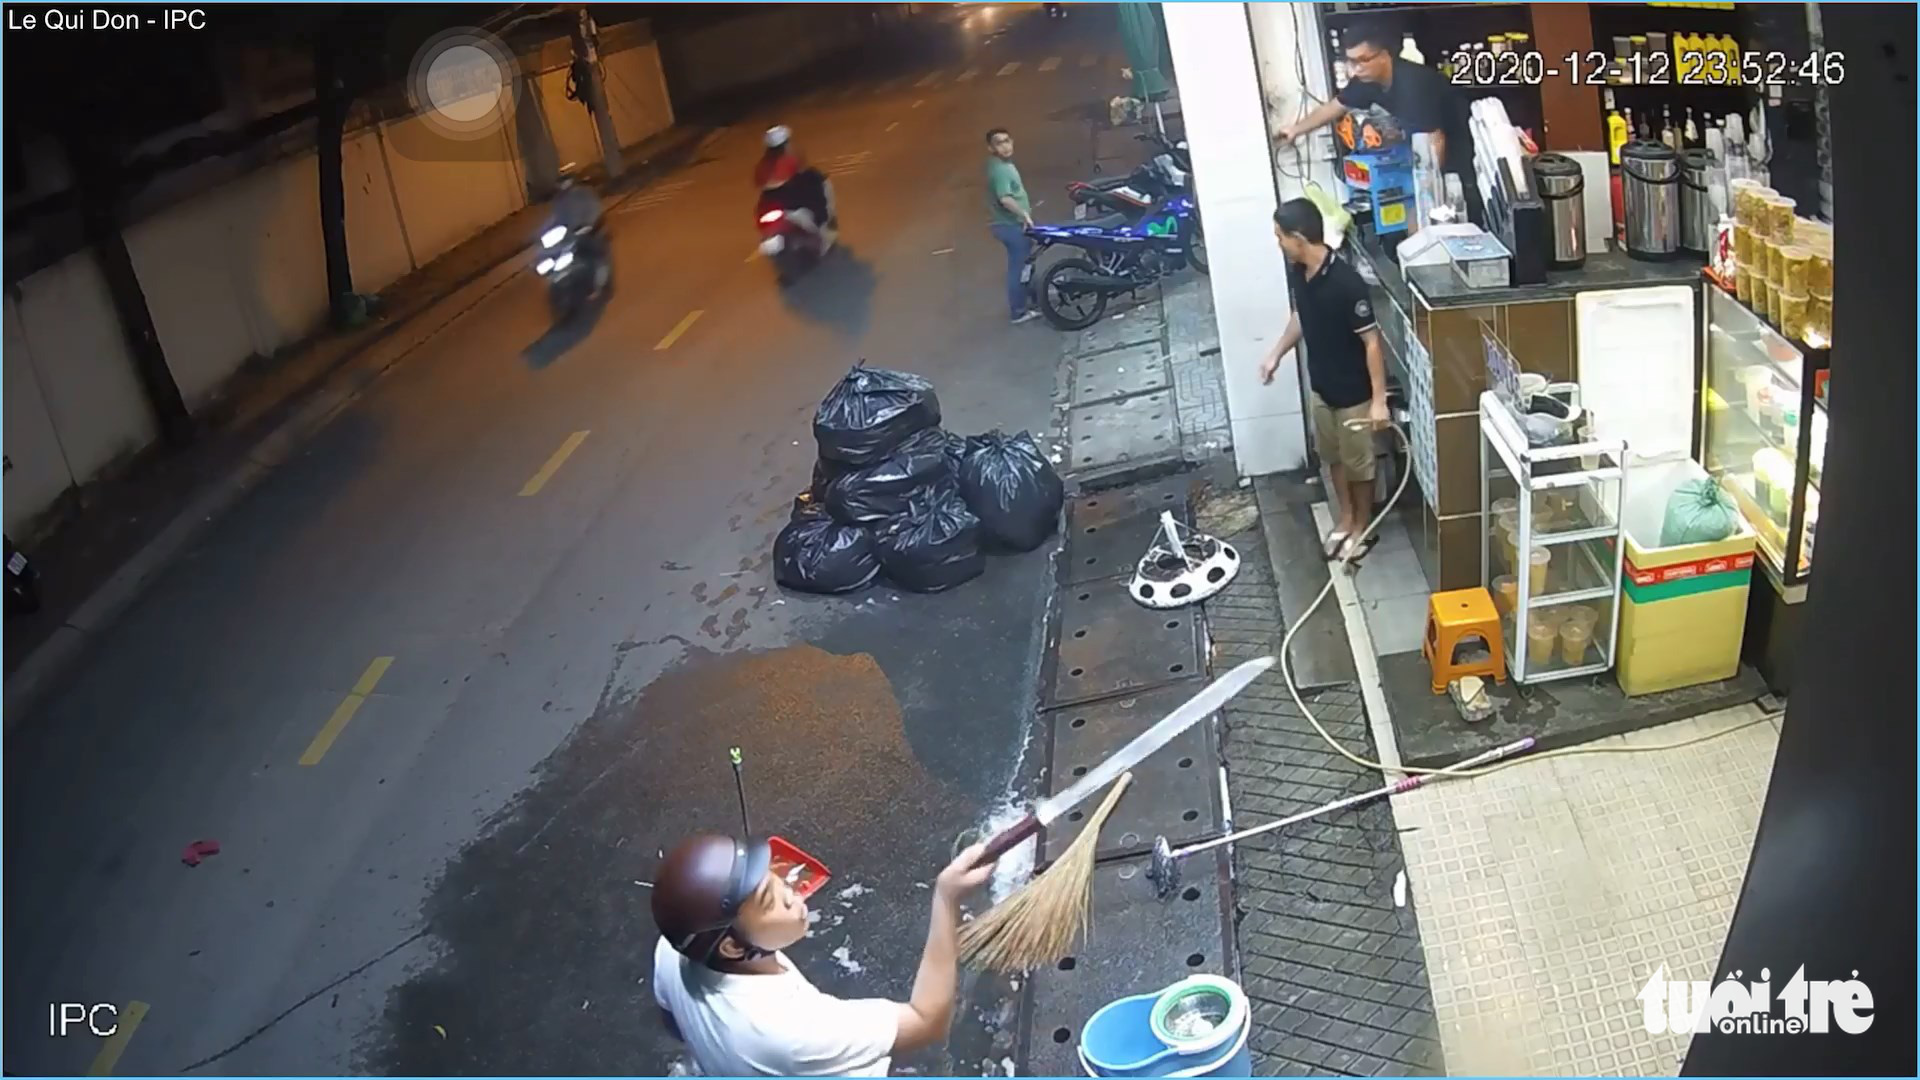 Man threatens bystanders with machete after brutally beating woman in Ho Chi Minh City